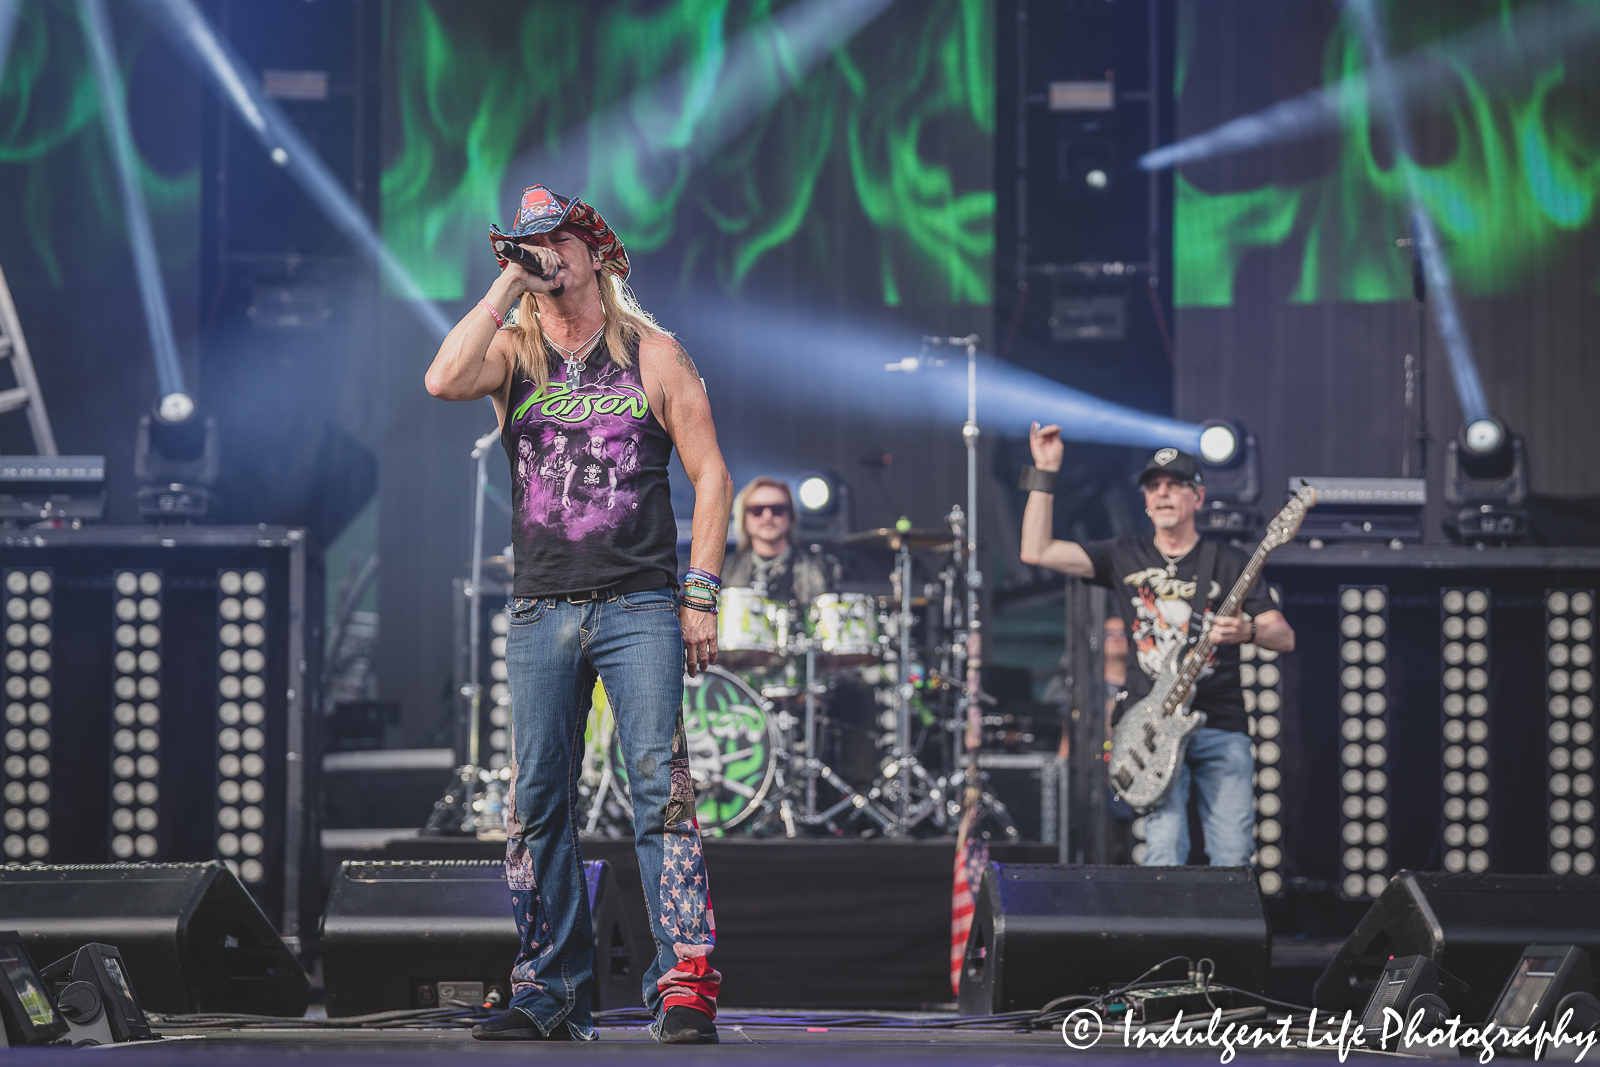 Bret Michaels performing live with Poison members Bobby Dall and Rikki Rockett during the stadium tour concert at Kauffman Stadium in Kansas City, MO on July 19, 2022.